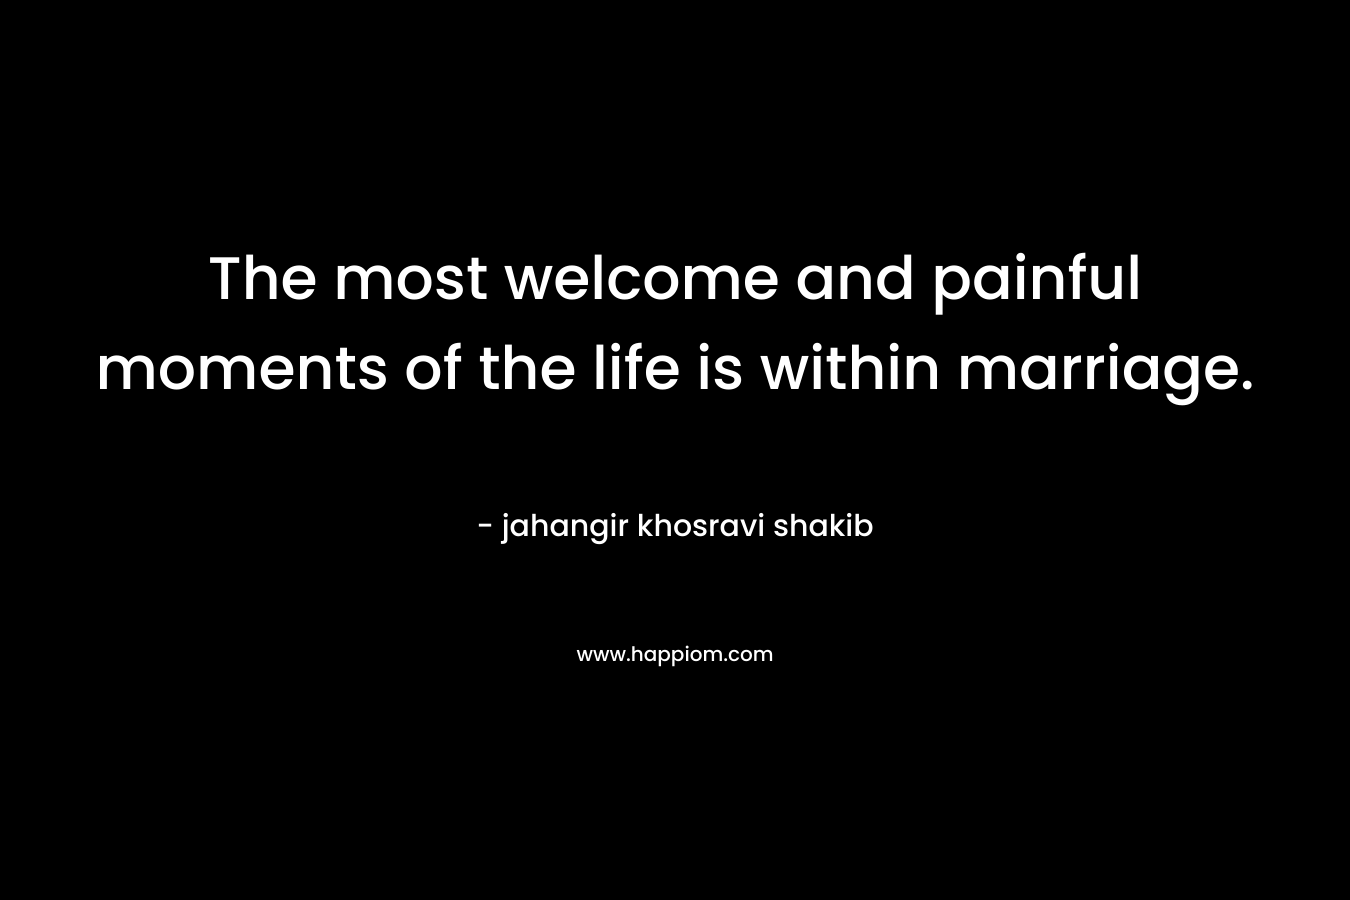 The most welcome and painful moments of the life is within marriage.